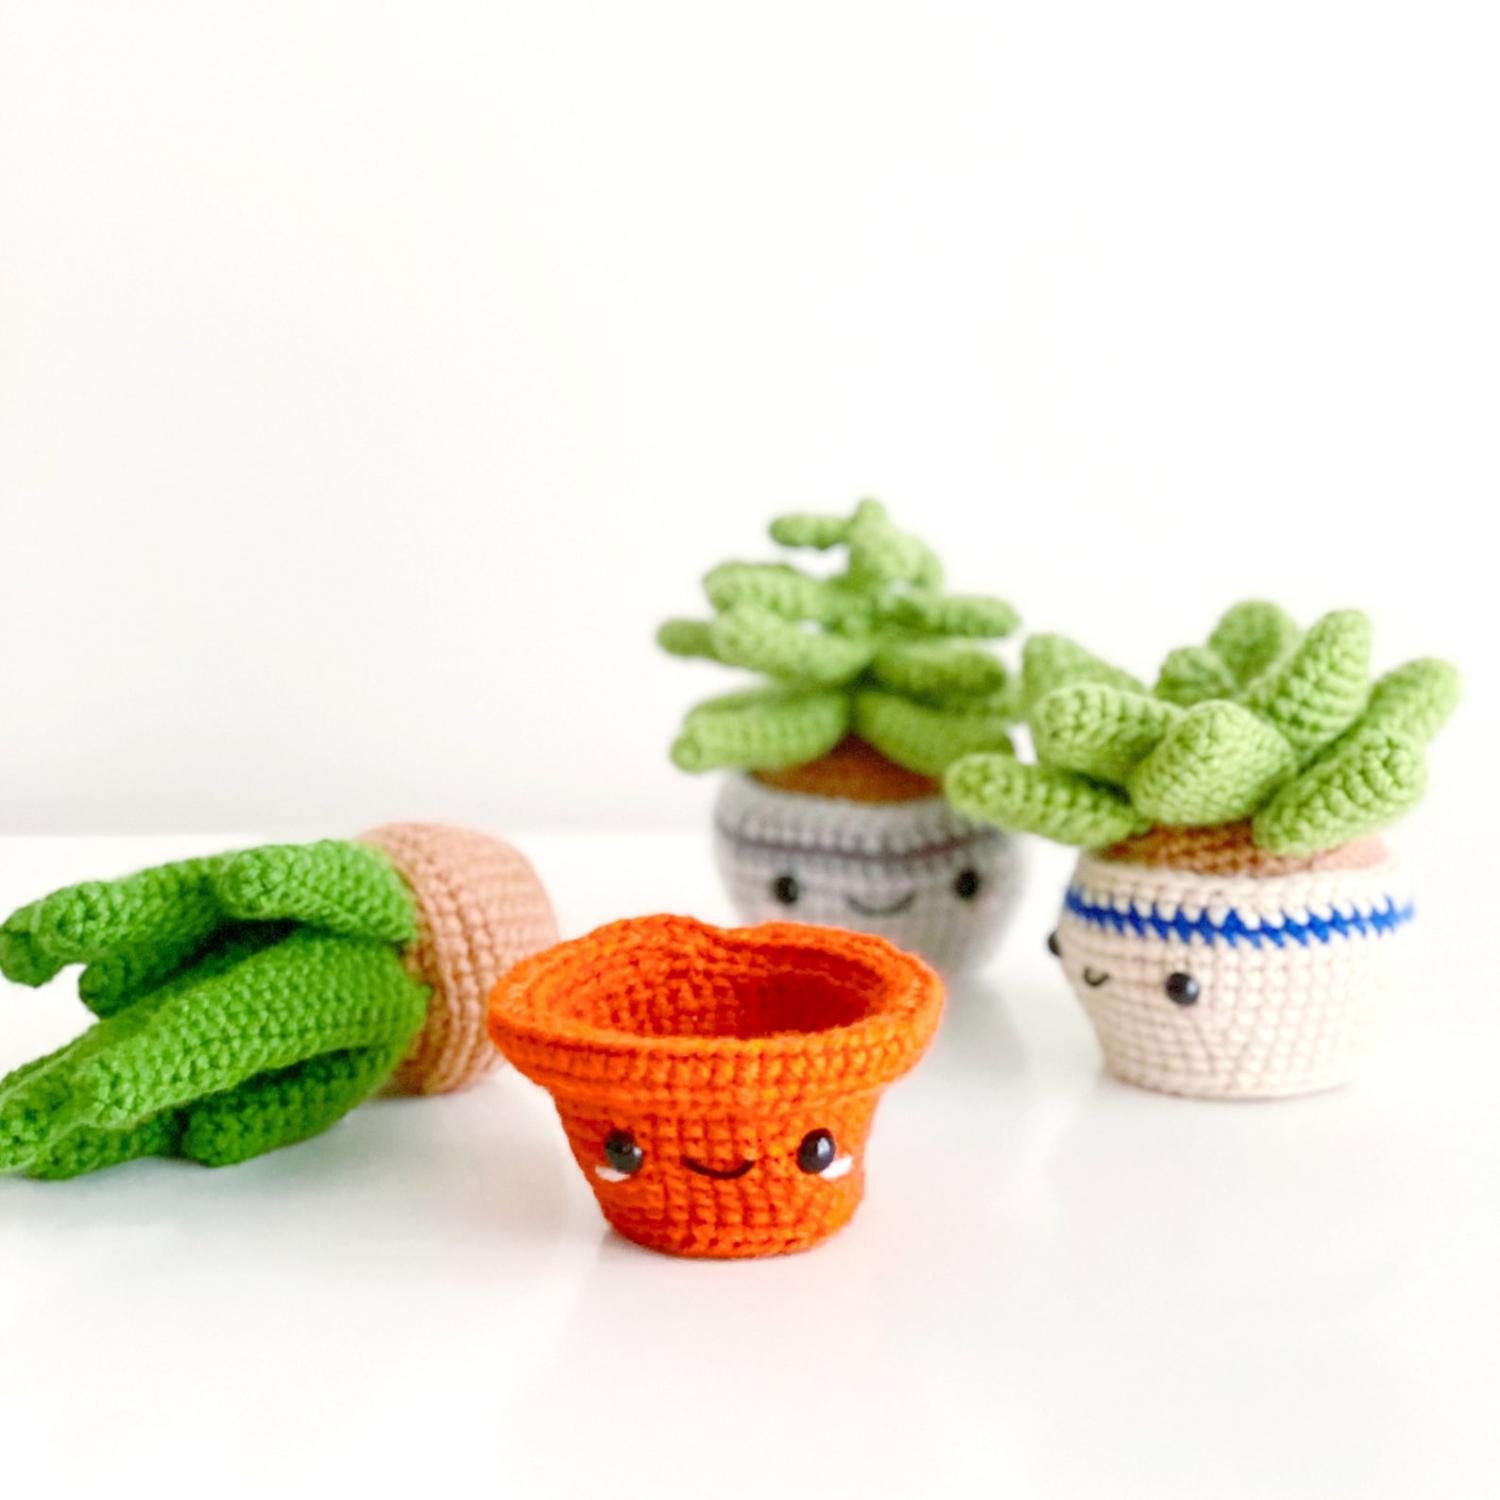 Some crochet House Plants succulents in orange, white, light blue, and light pink pots